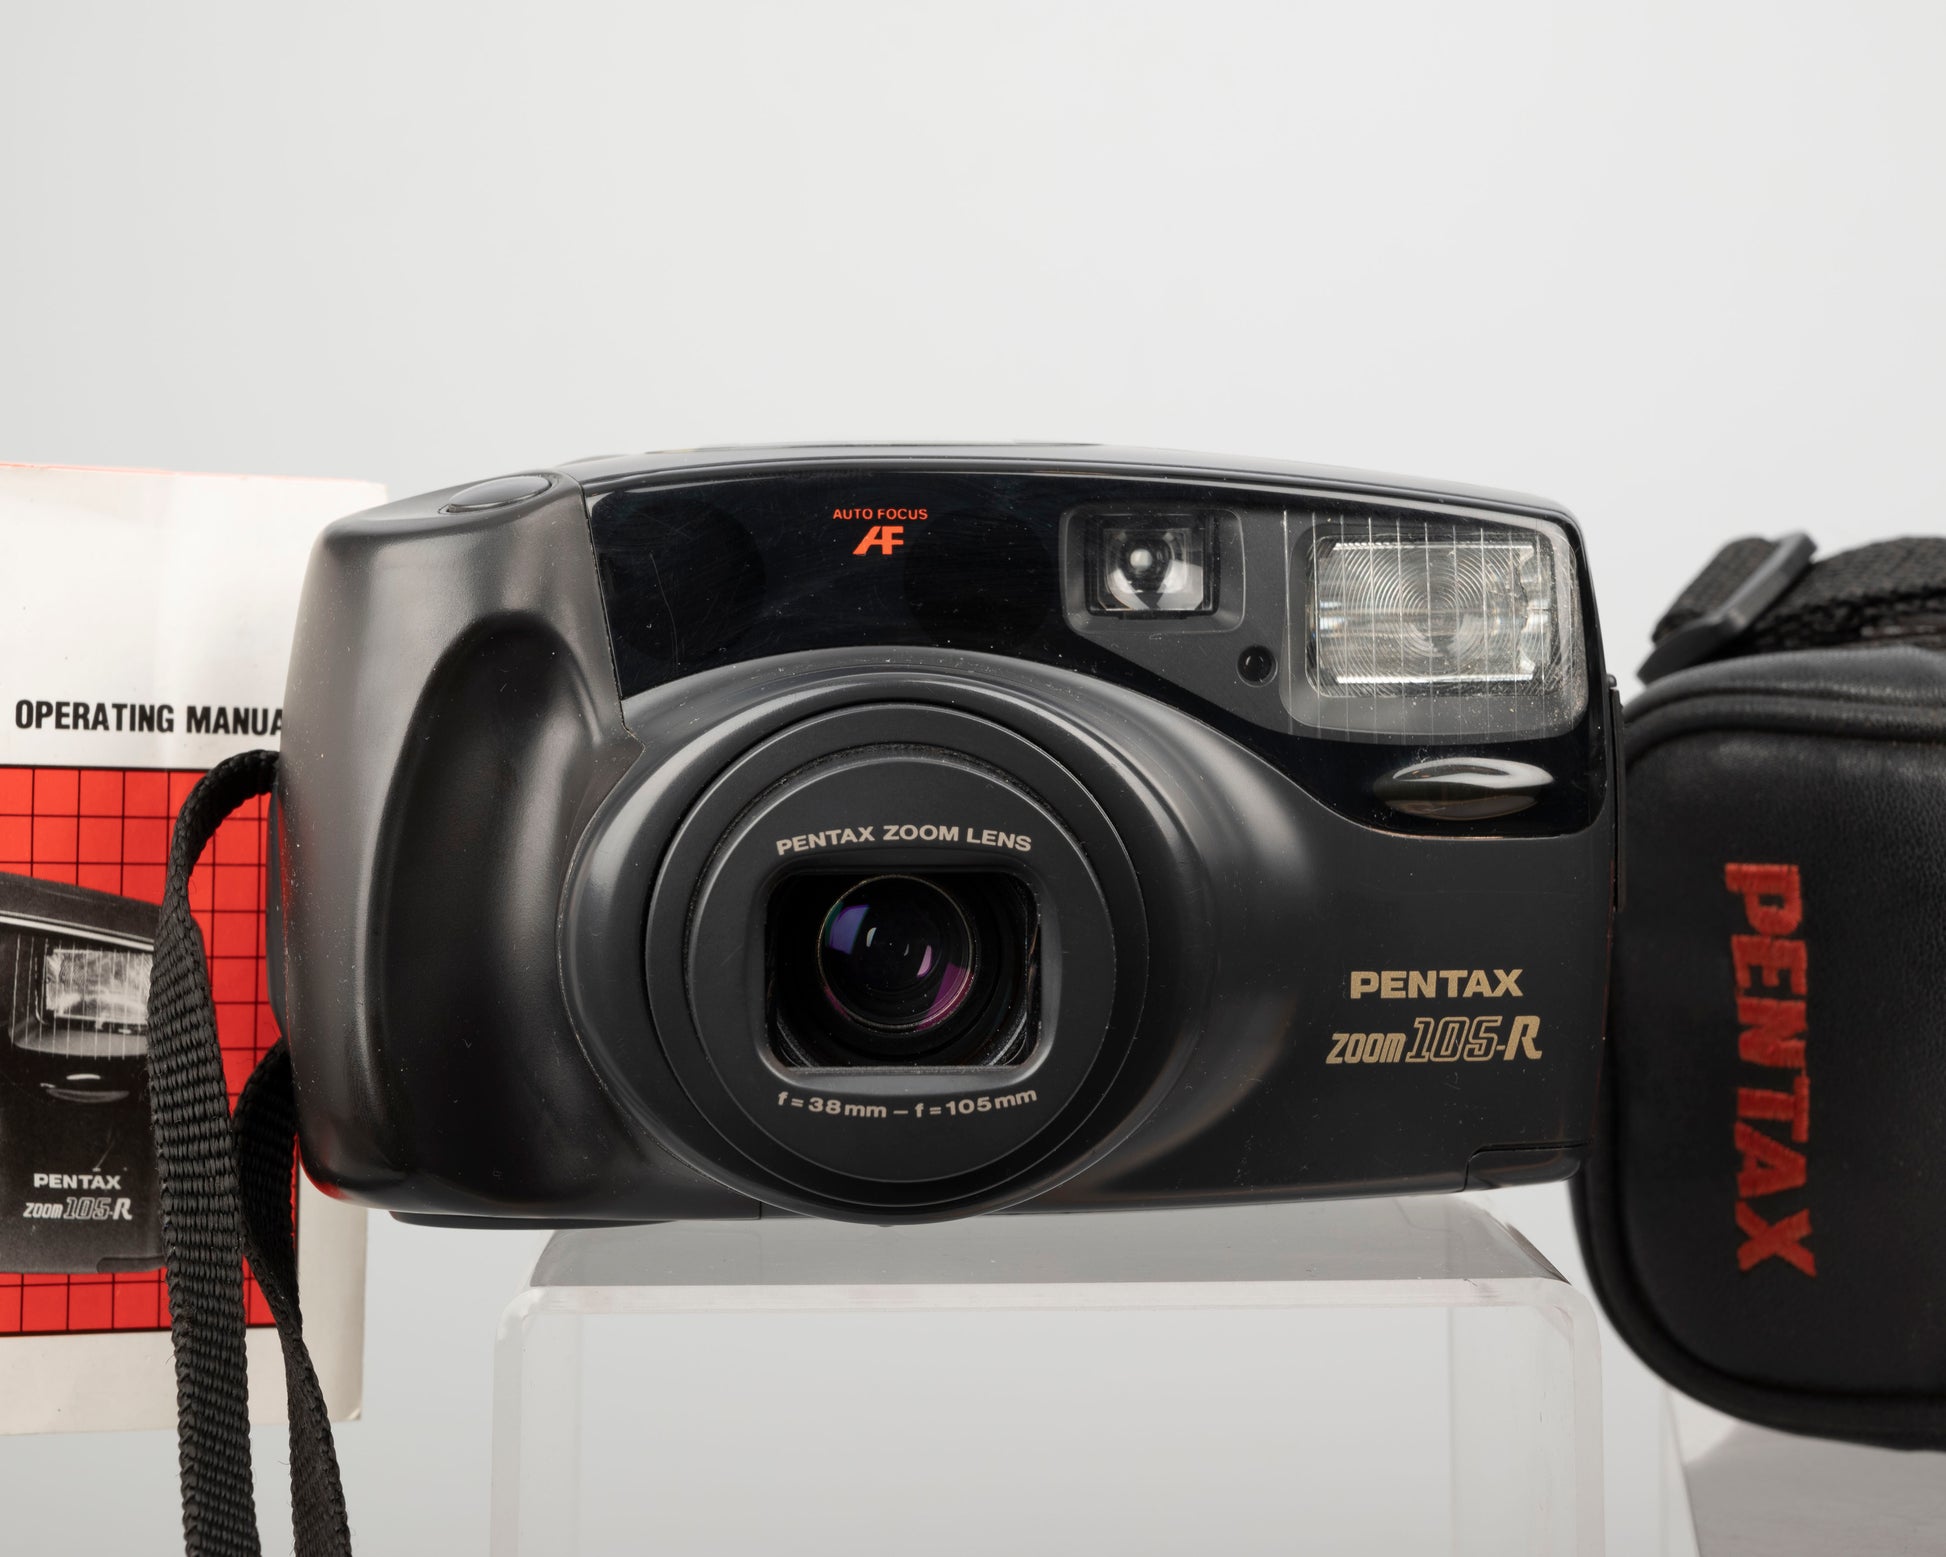 The Pentax Zoom 105-R is one of the best zoom 35mm point-and-shoot of the early 1990s